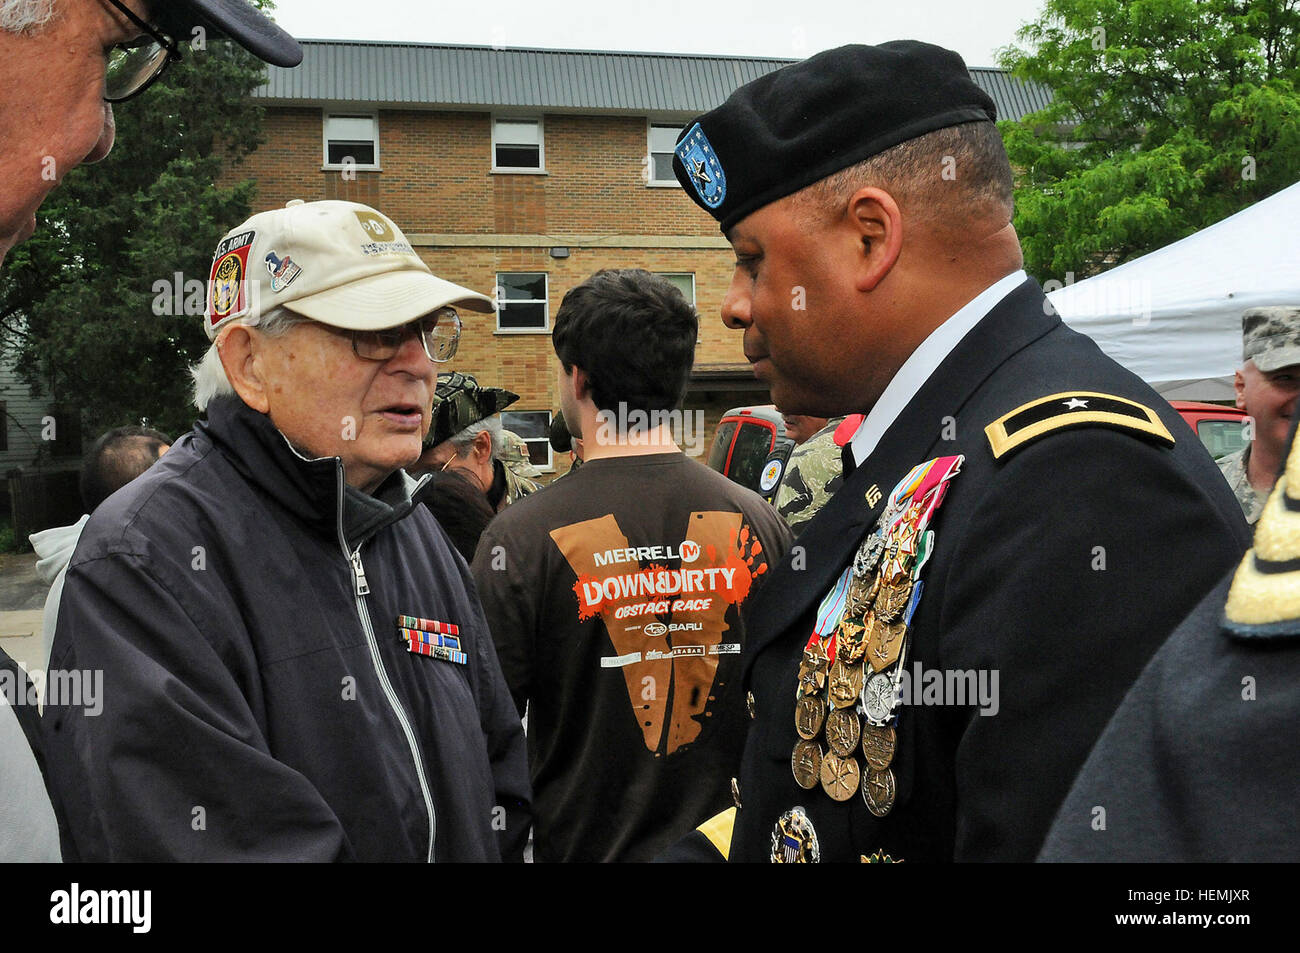 Paul Benson, World War II veteran who was part of the initial surge that stormed the beach of Normandy, meets Brig. Gen. Gracus K. Dunn, Commanding General, 85th Support Command, May 27, before the Memorial Day ceremony in Arlington Heights. Benson was awarded three Bronze Stars for his faithful service to our country during World War II and shares his story with whoever he meets at events such as the Arlington Heights Memorial Day parade and ceremony. Arlington Heights, Ill. hosts one of the largest Memorial Day parades in Illinois with close to 10, 000 spectators in attendance and 4,500 part Stock Photo